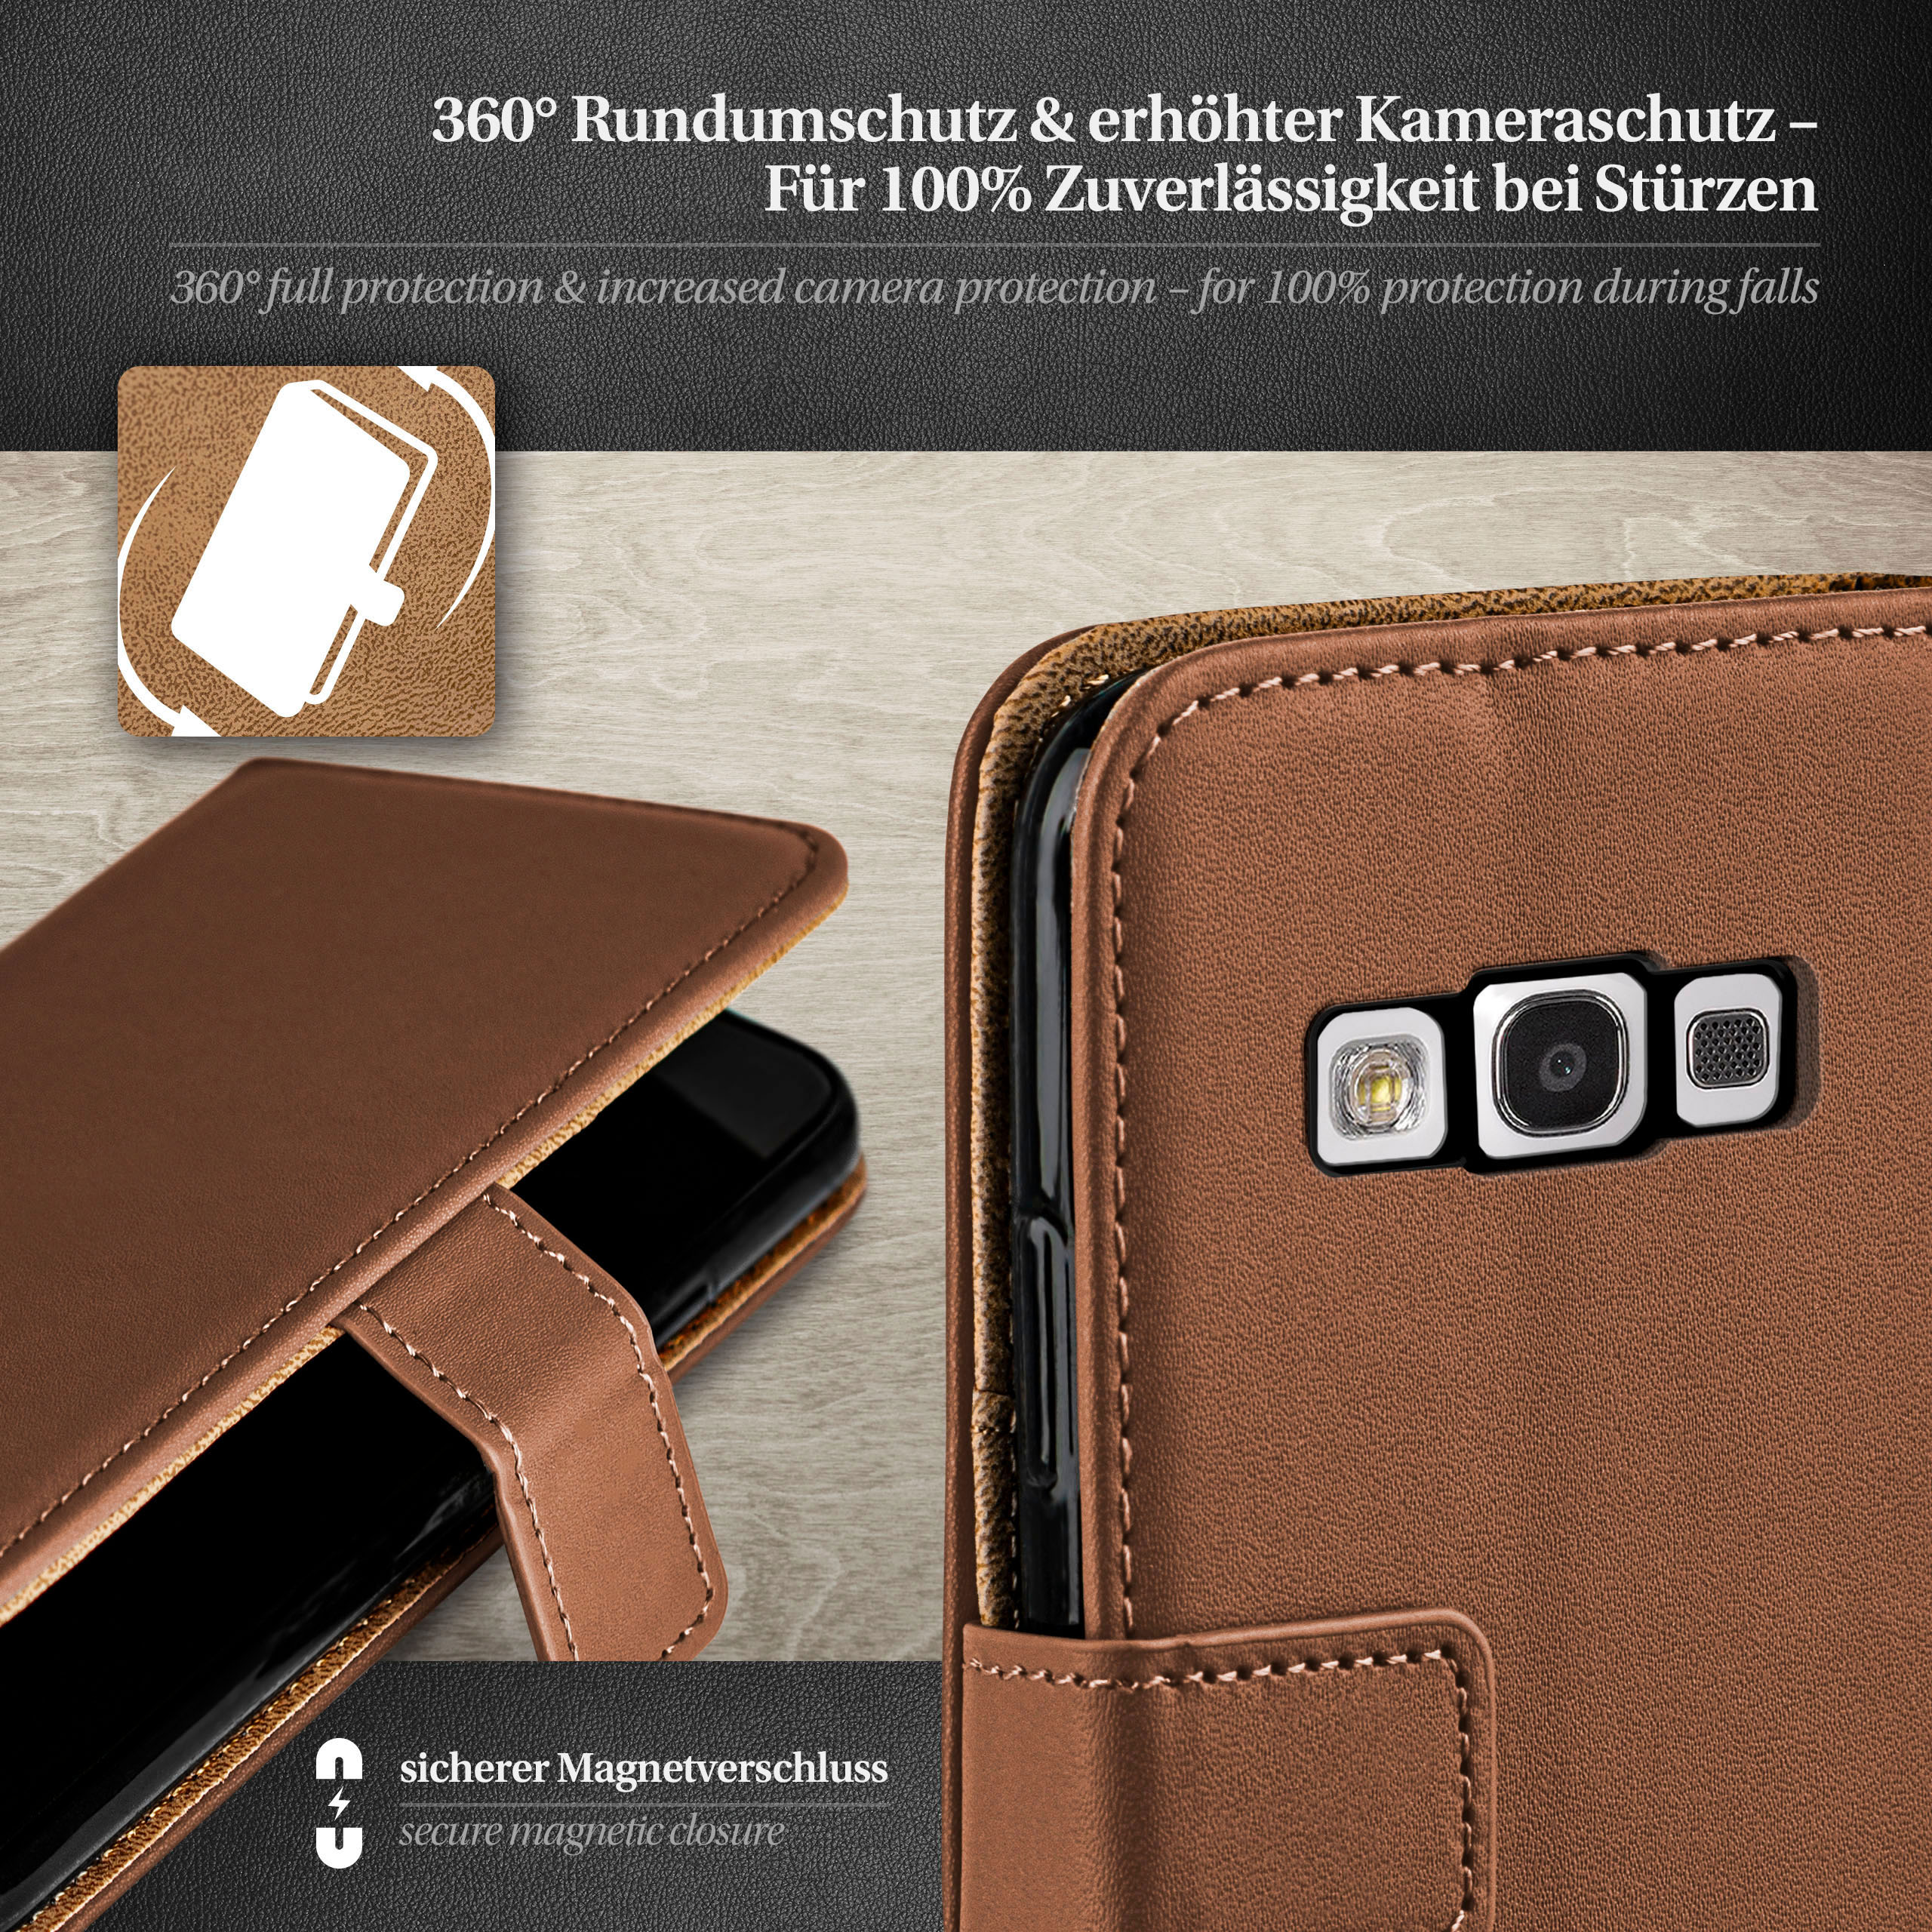 MOEX Book S3 Neo, Umber-Brown Bookcover, / Galaxy Case, S3 Samsung,